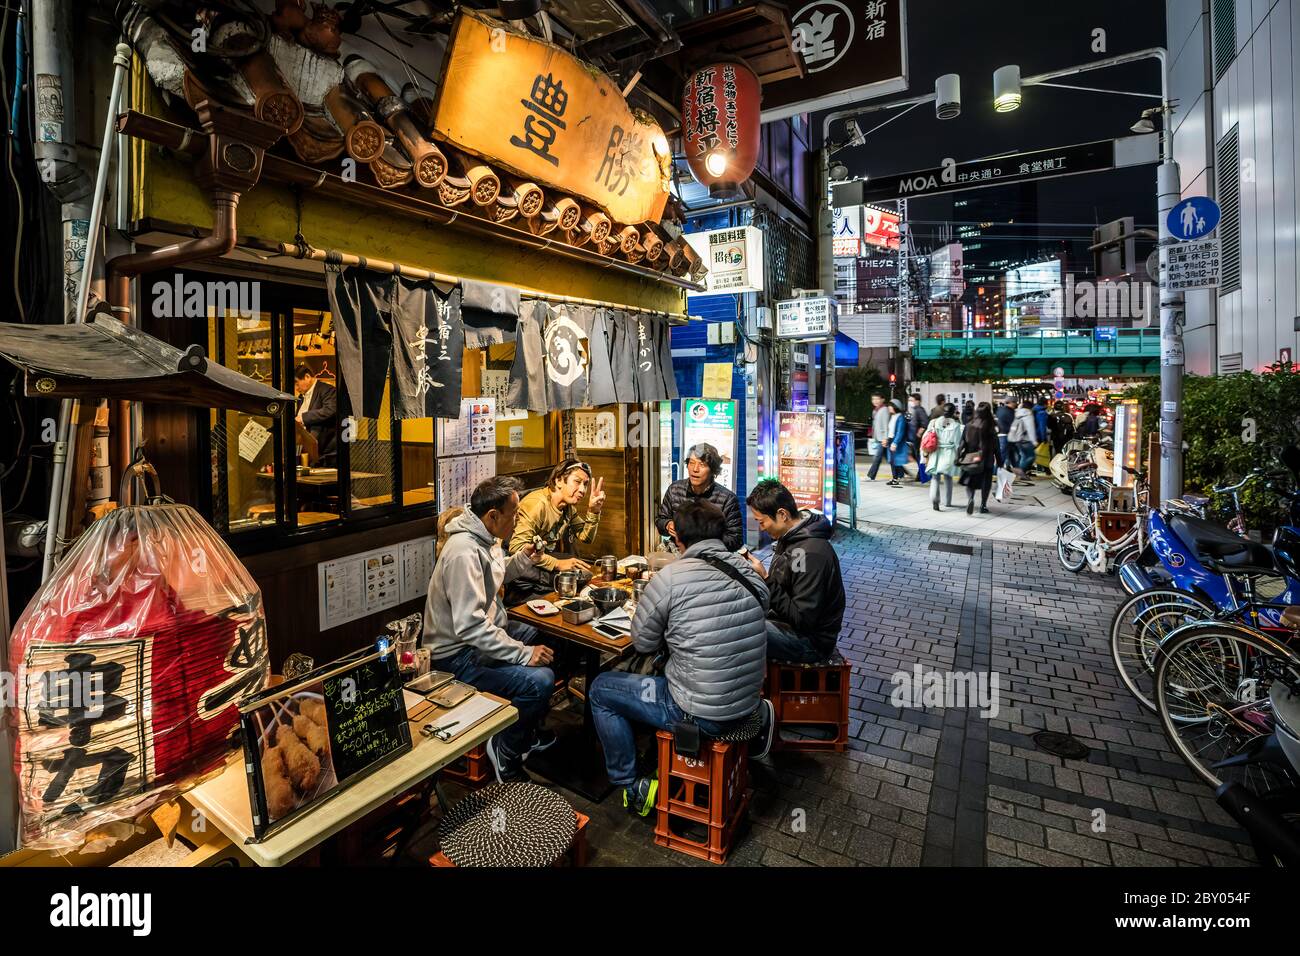 Tokyo Japan October 29th 2016 : Locals eating at a restaurant in the Shinjuku district of Tokyo Stock Photo